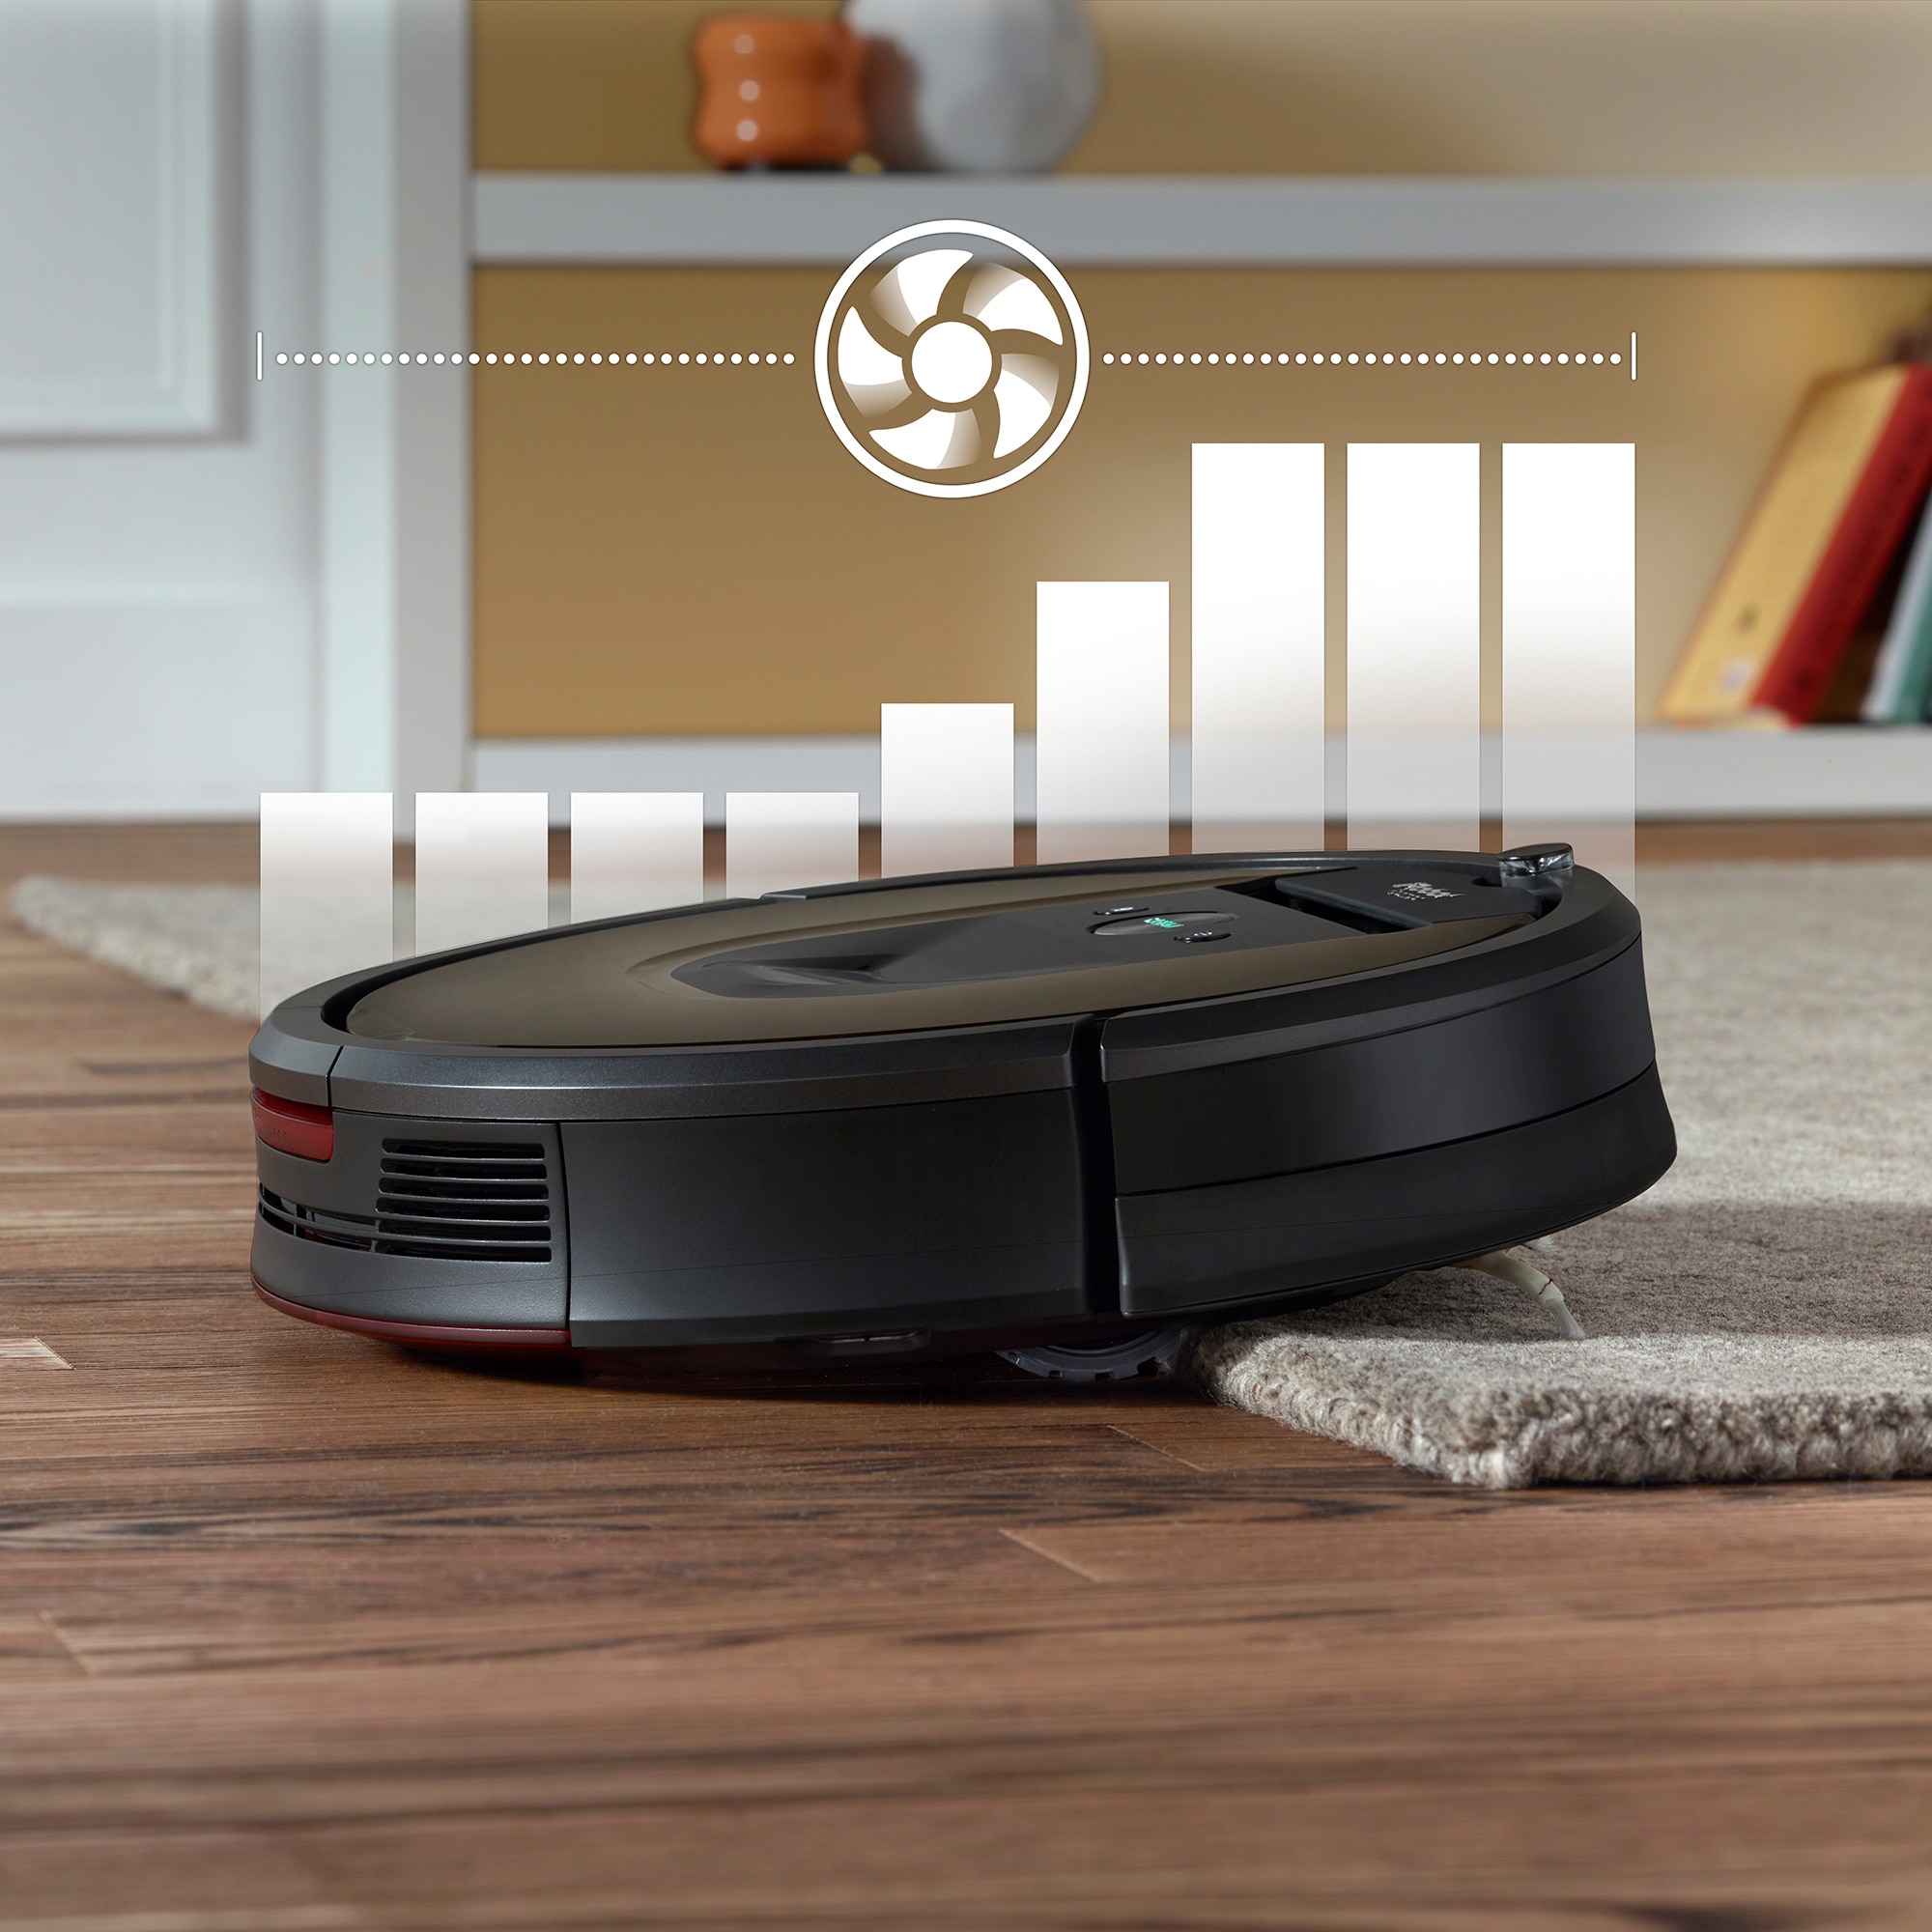 Home & Garden - Cleaning, Laundry & Vacuums - Robotic Vacuums